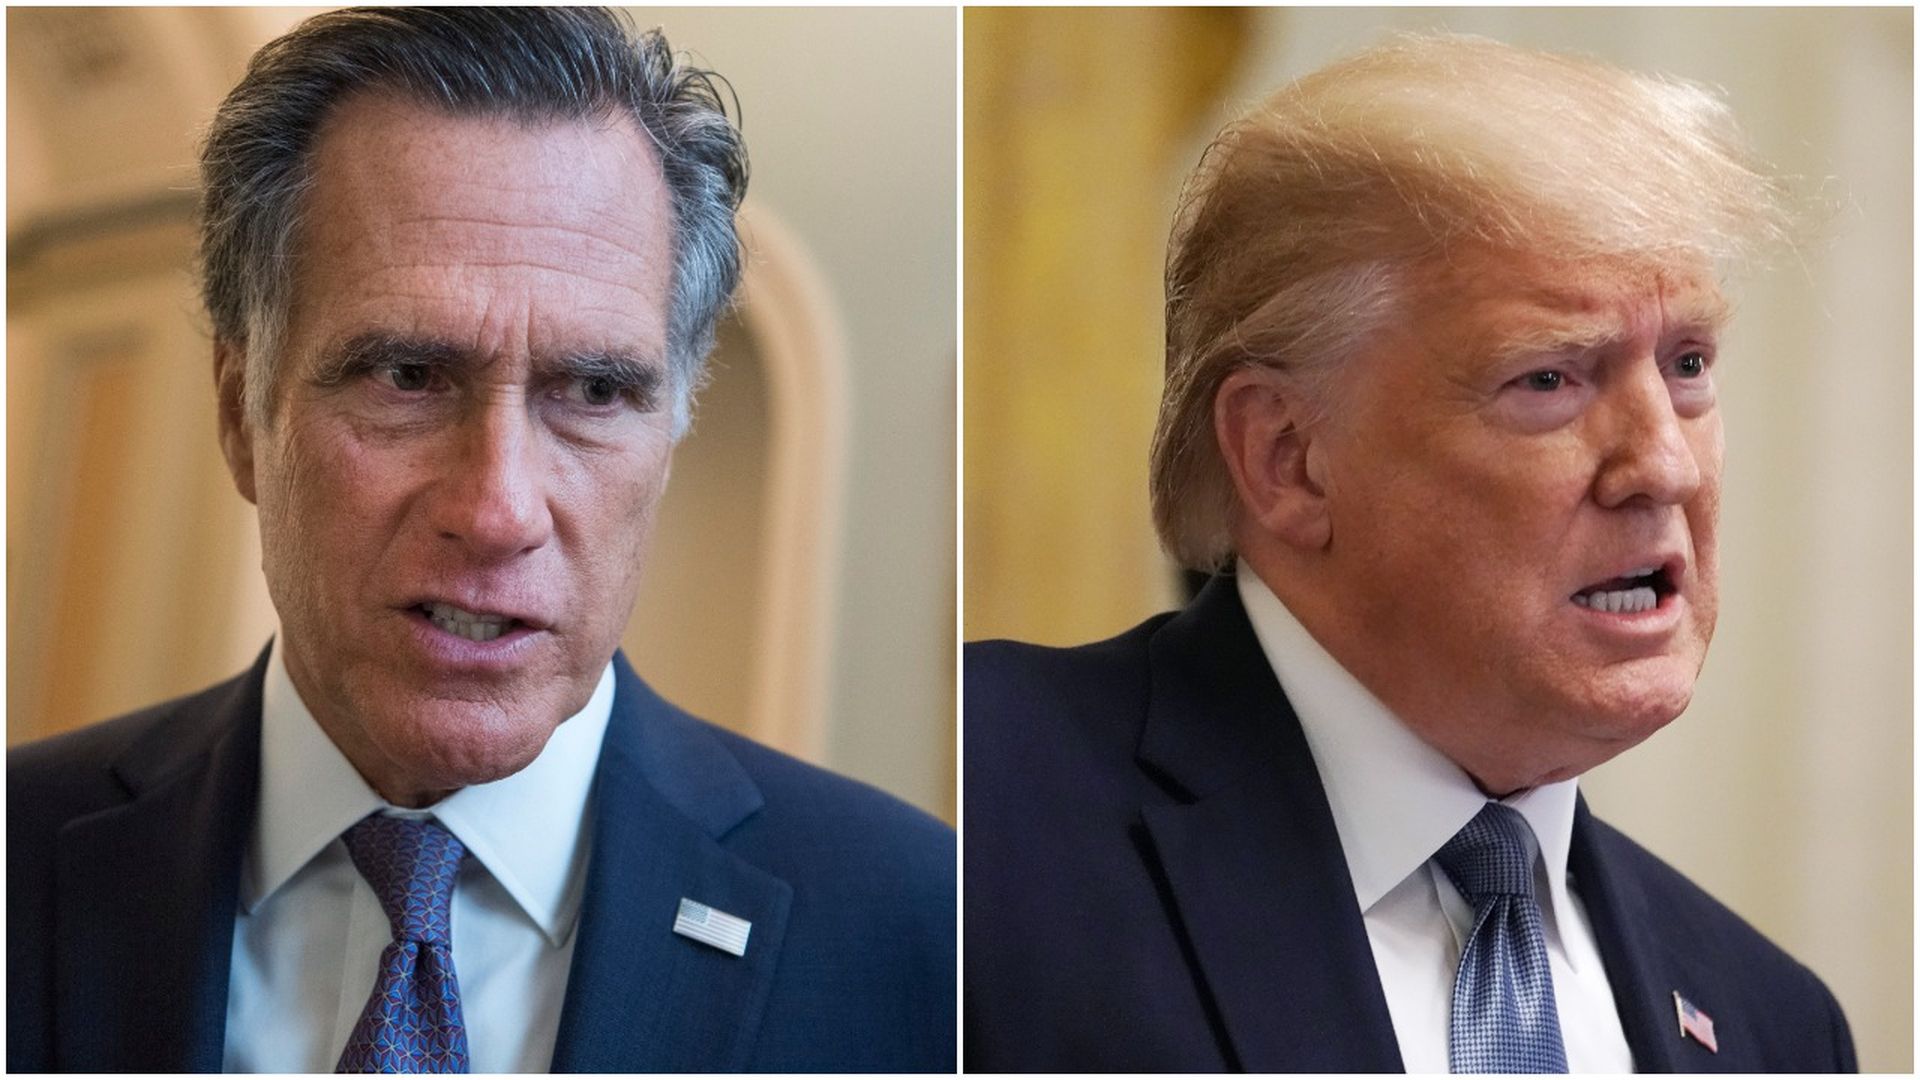 This image is a split screen between Romney and Trump